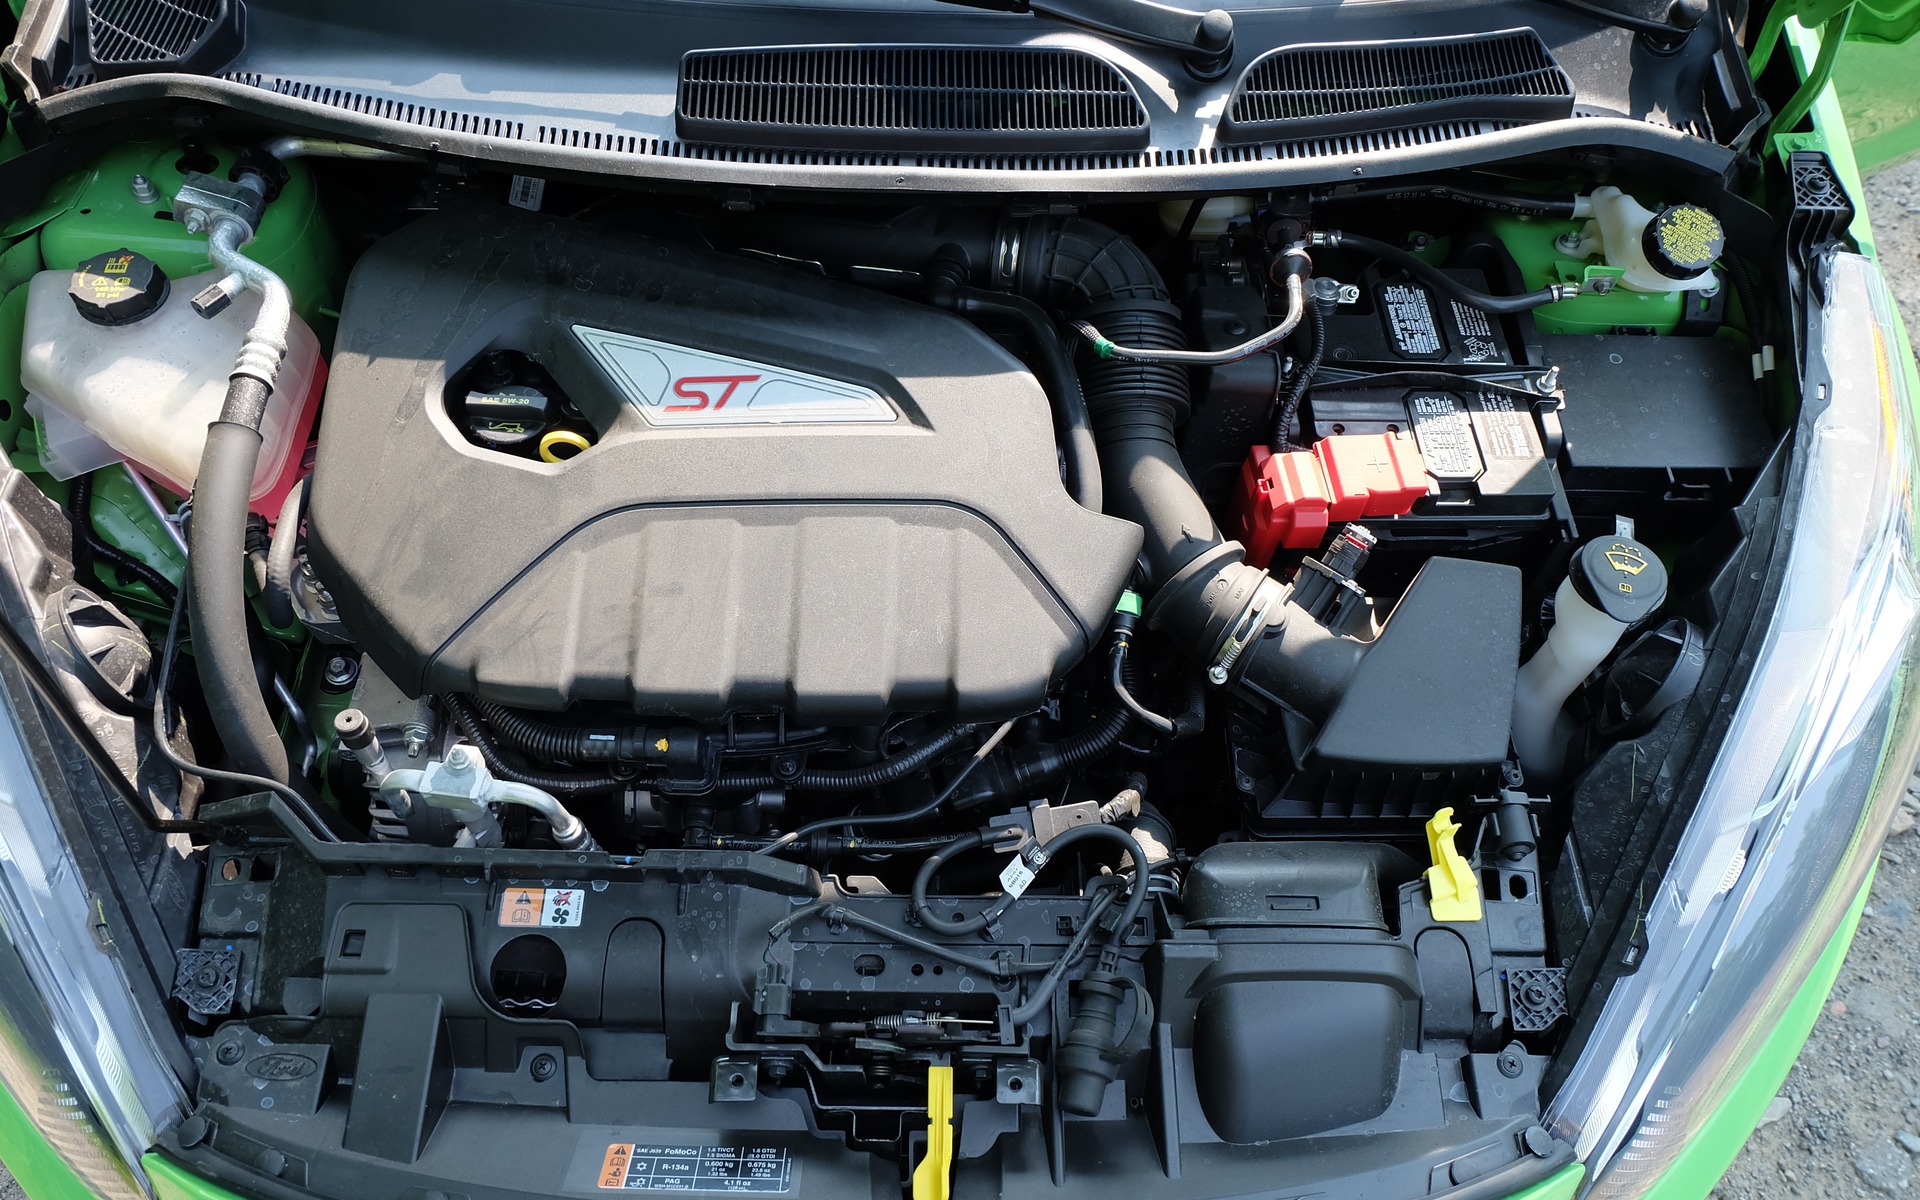 There are 197 horses hidden in this 1.6-litre Ecoboost engine.